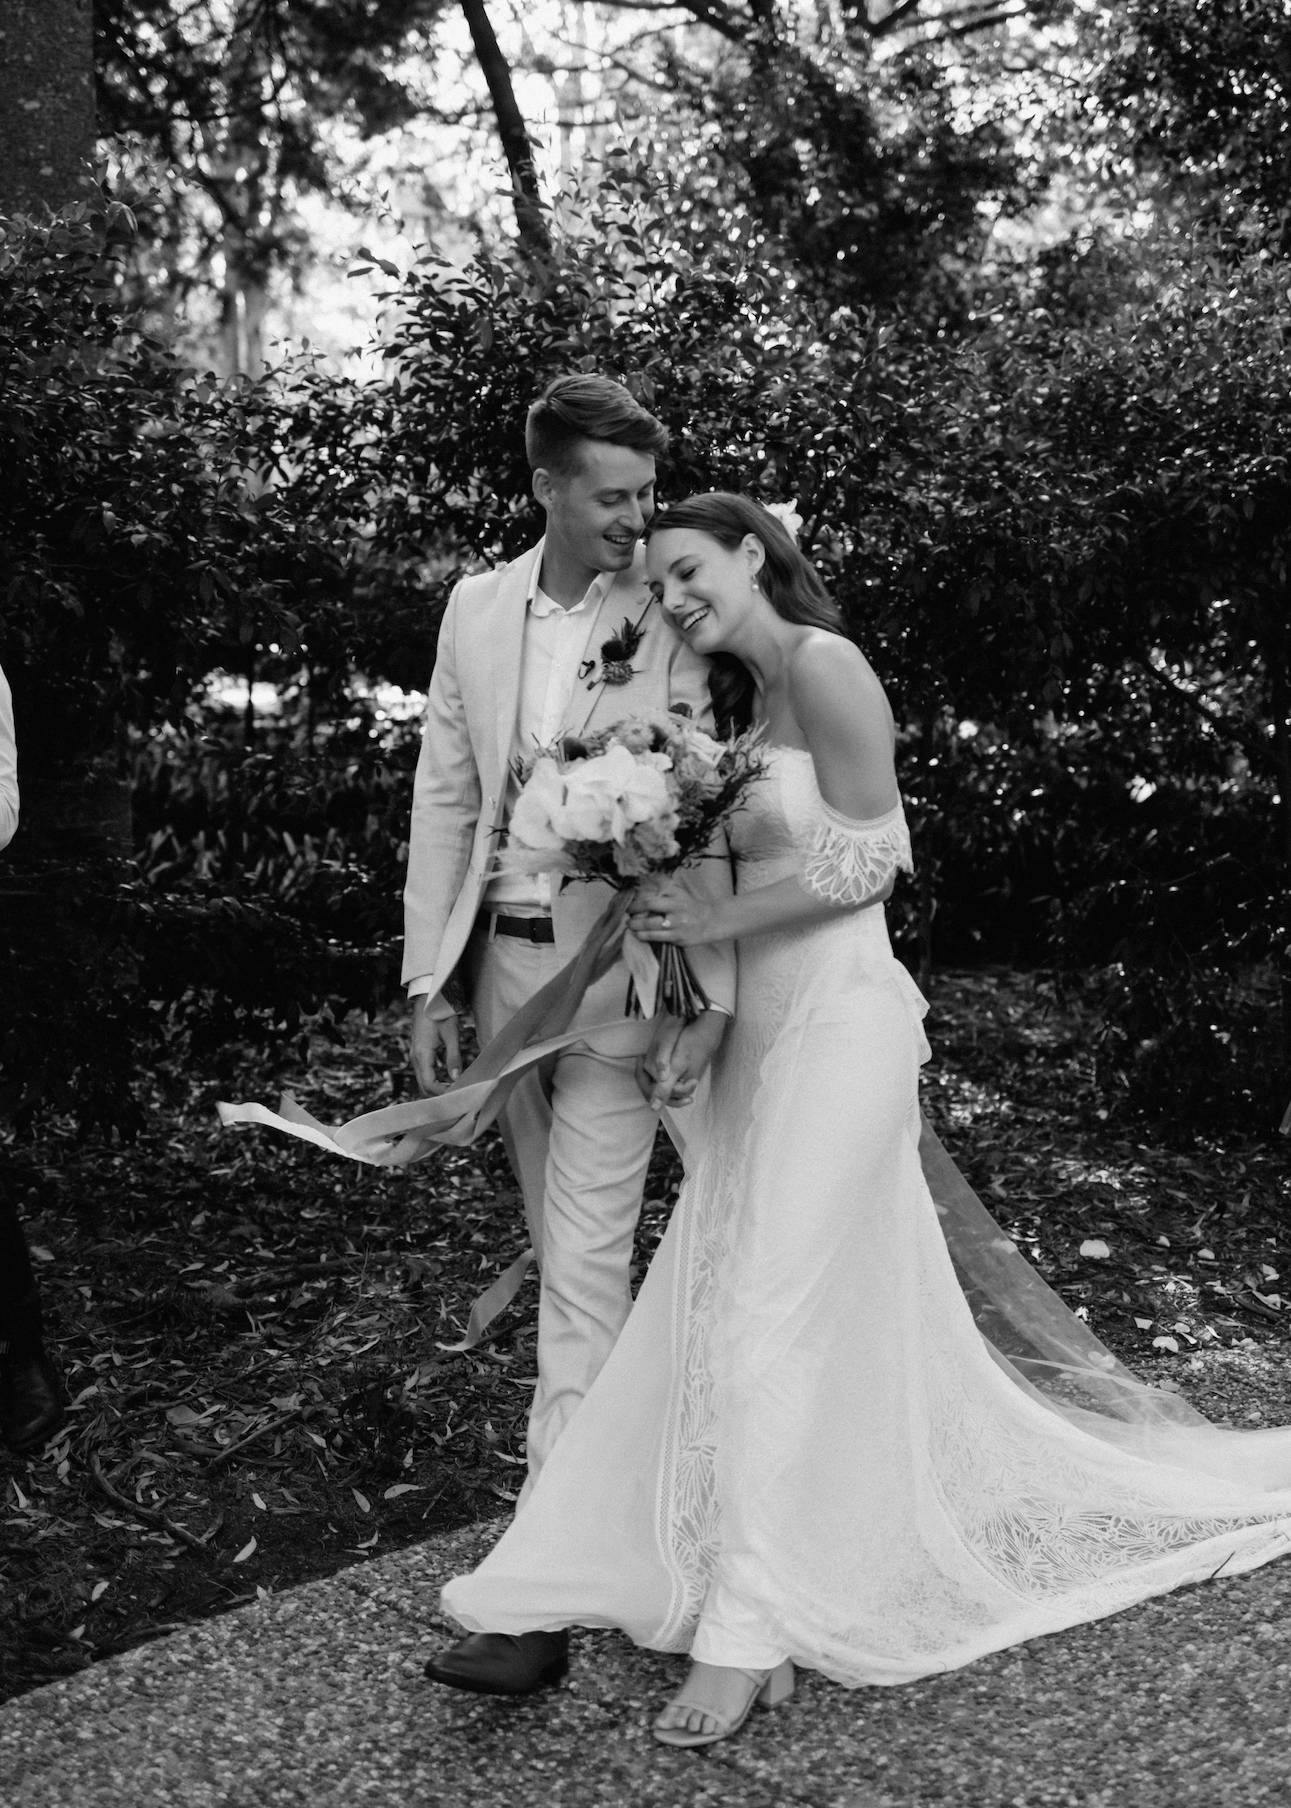 A couple is walking outside on a stone path surrounded by greenery. The groom, wearing a light-colored suit, is smiling at the bride, who is dressed in a long, elegant white gown, holding a bouquet of flowers and looking back at him. Both appear happy and joyful.